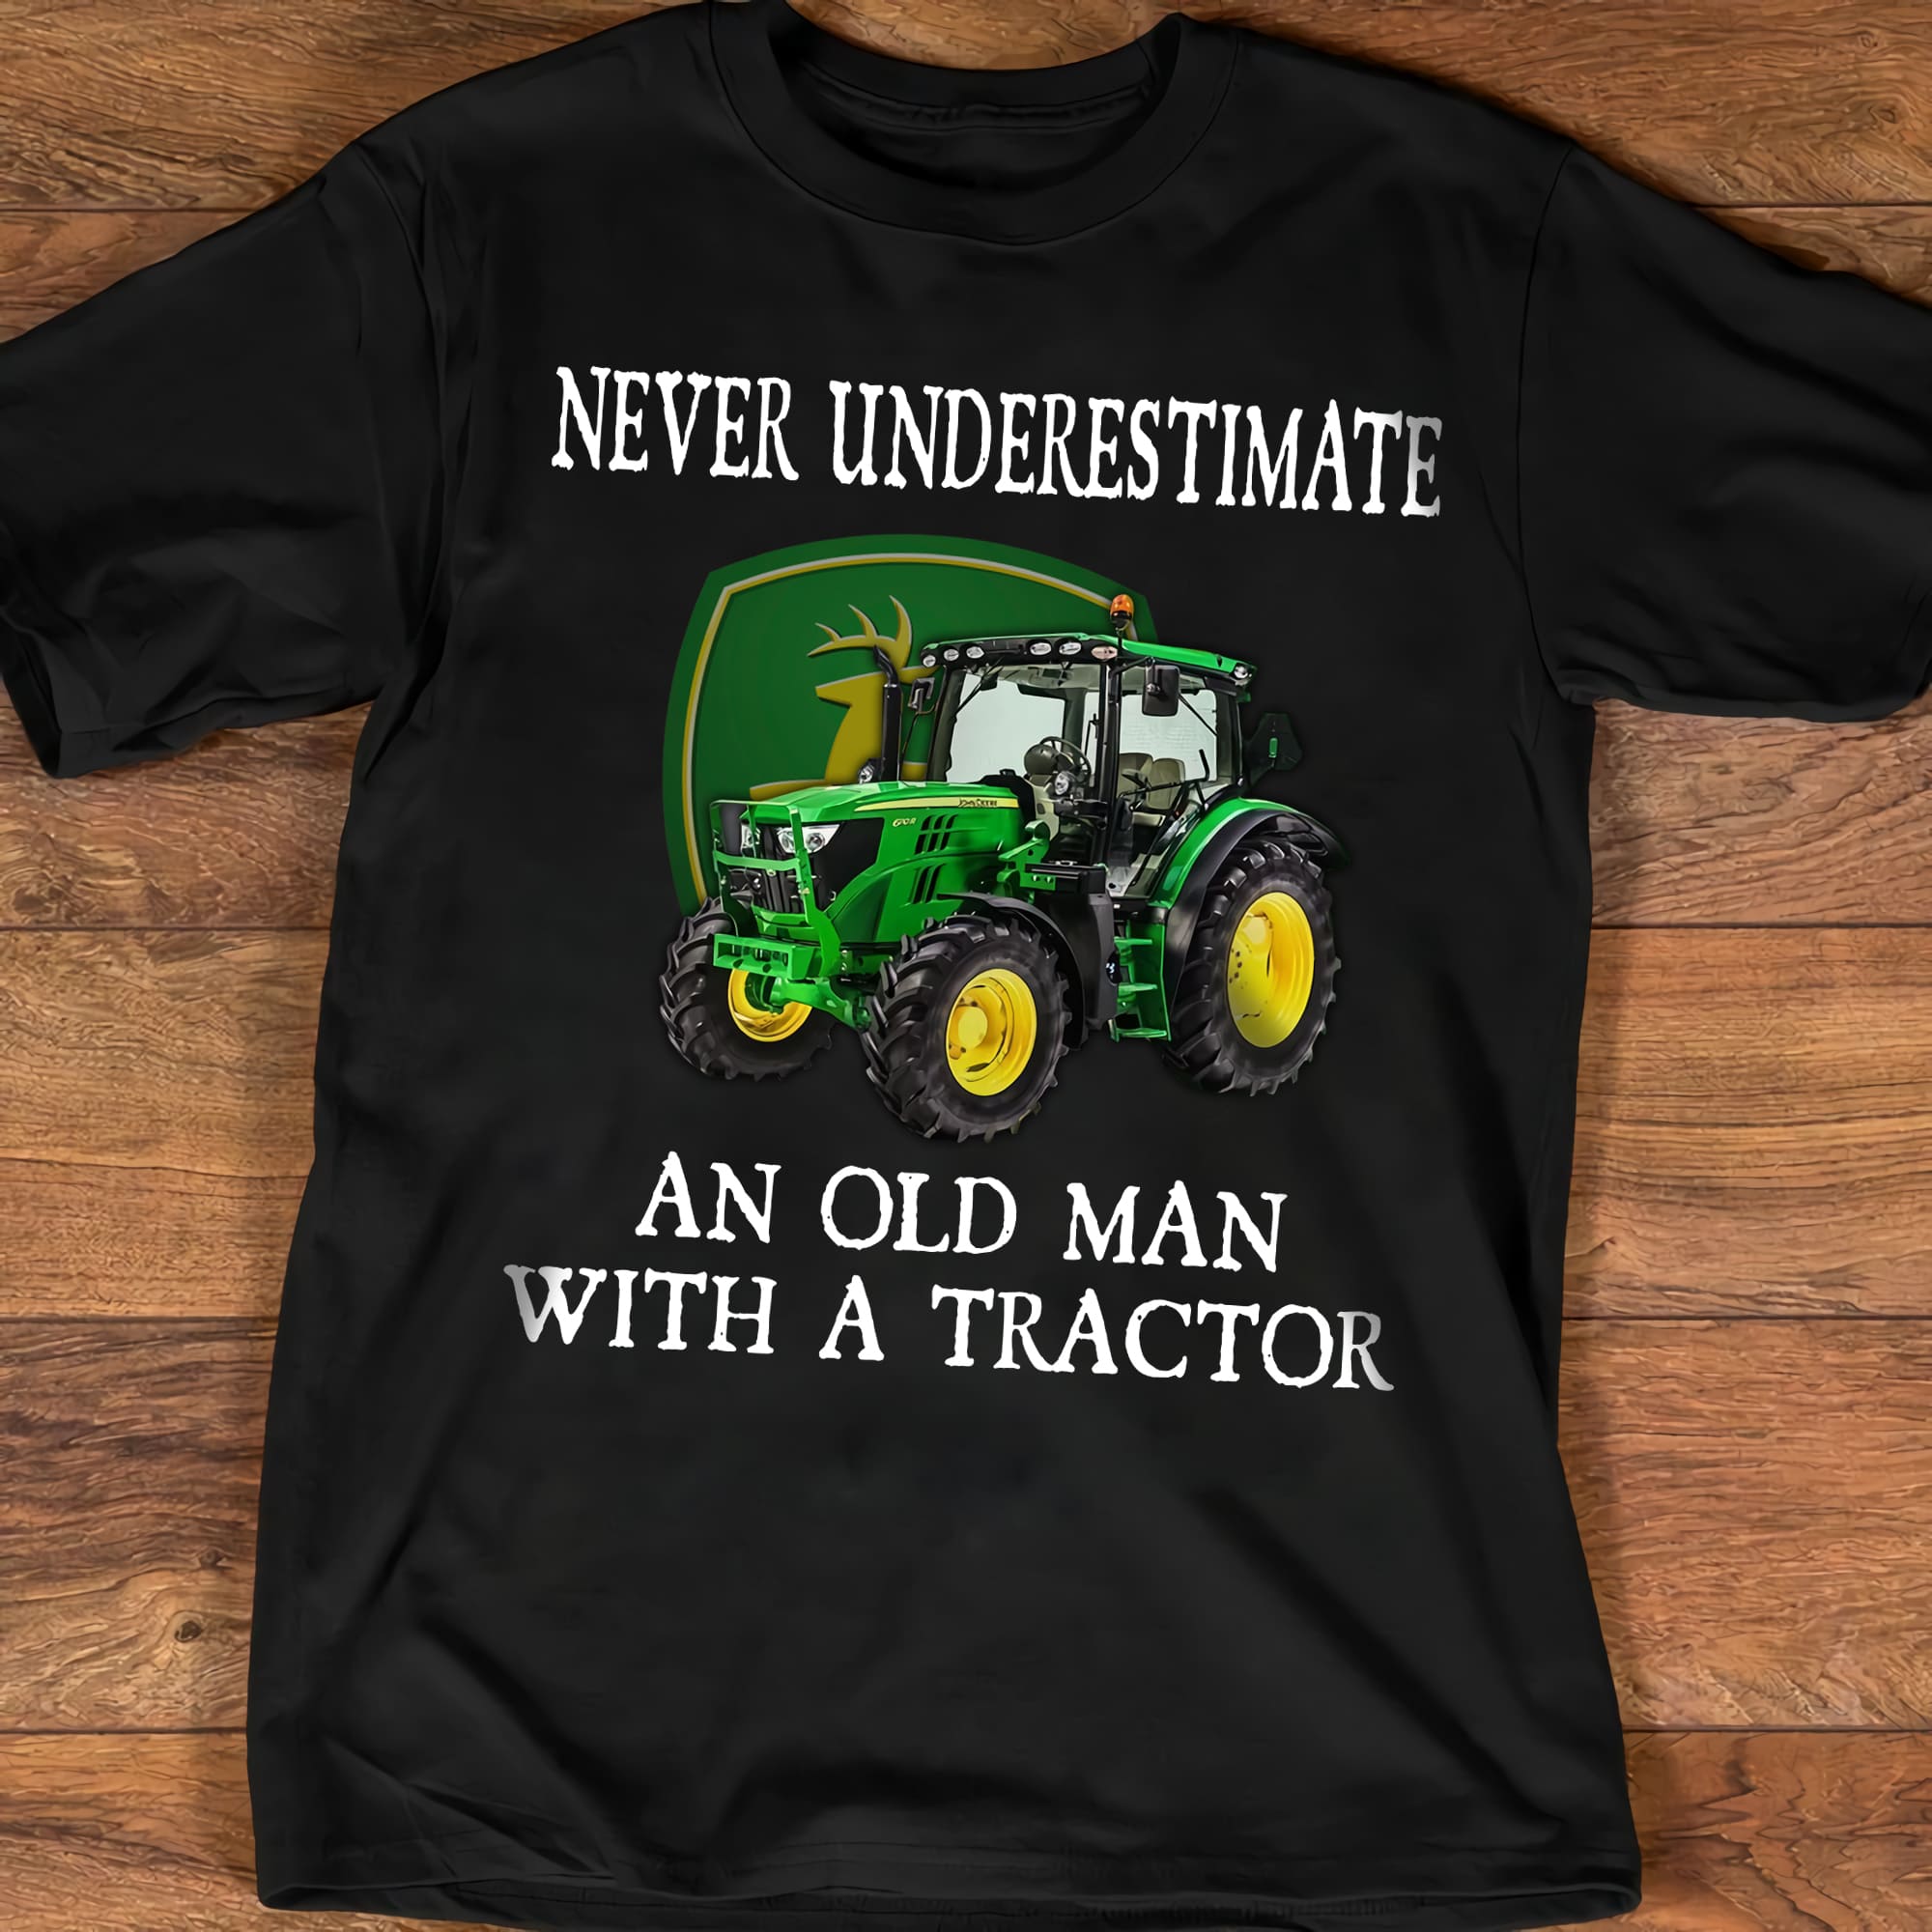 Never underestimate an old man with a tractor - Tractor driver, farmder ...